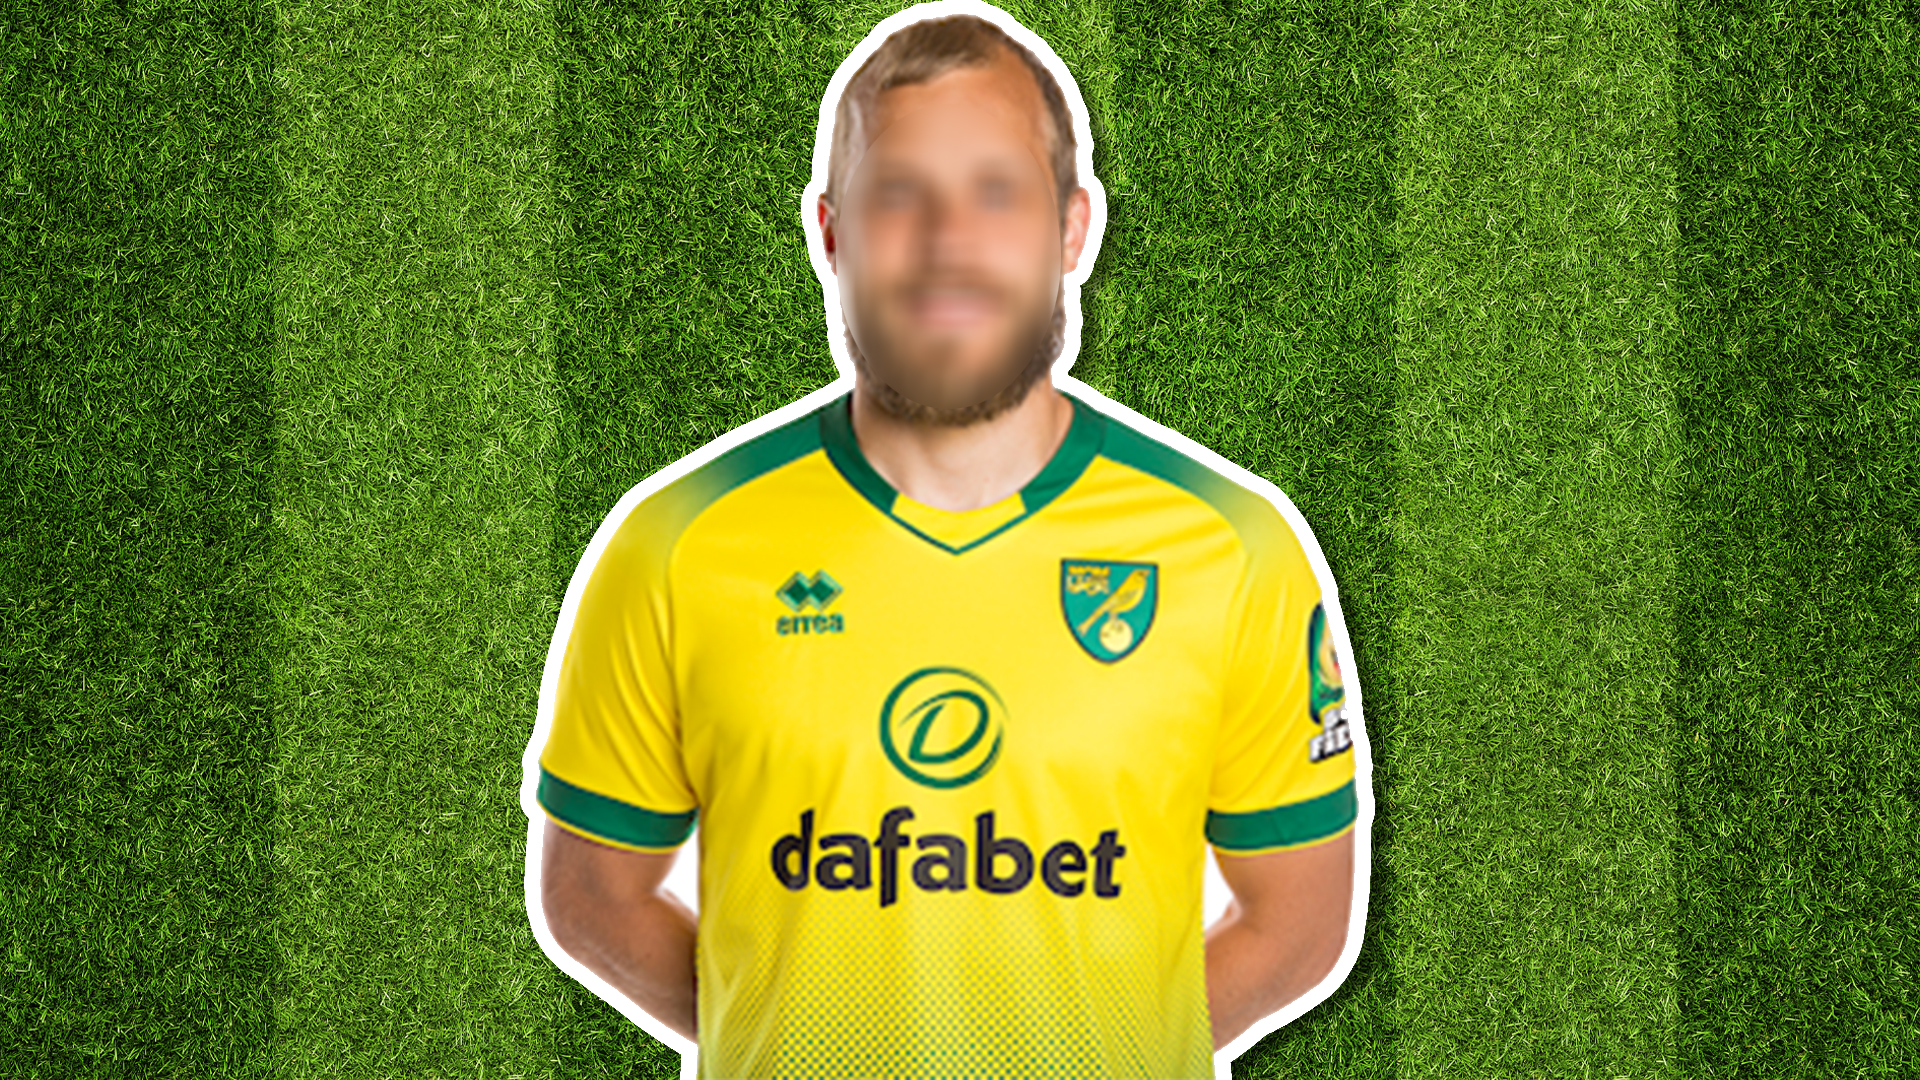 Norwich City player